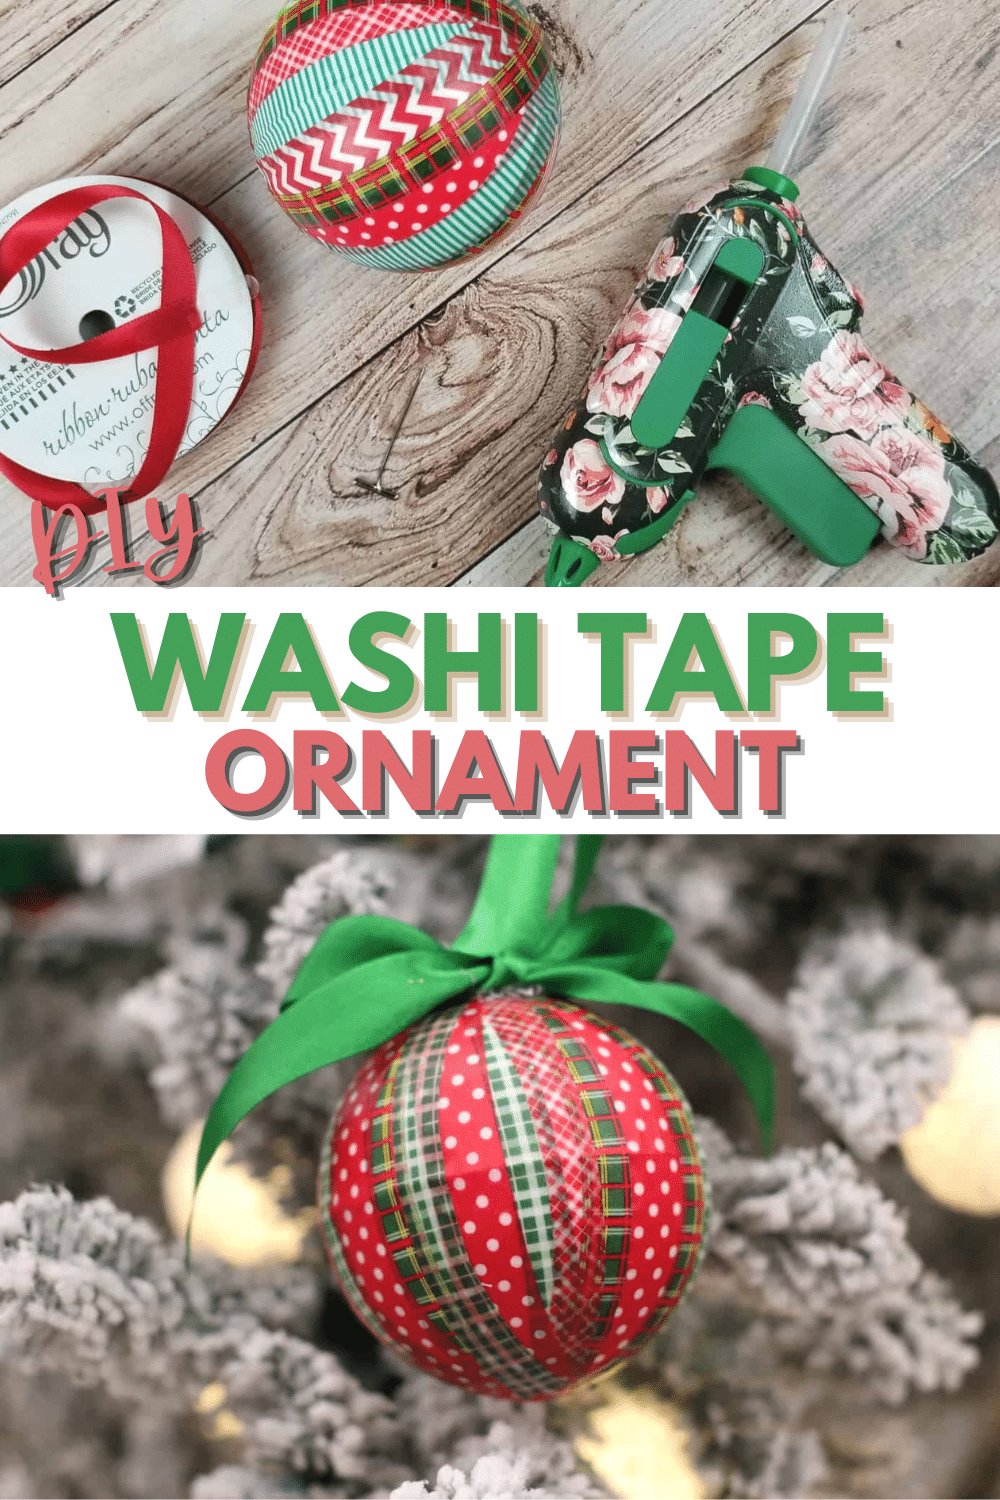 top image is the supplies needed to make Washi Tape Ornaments, bottom image is a Washi Tape Ornament hanging on a tree